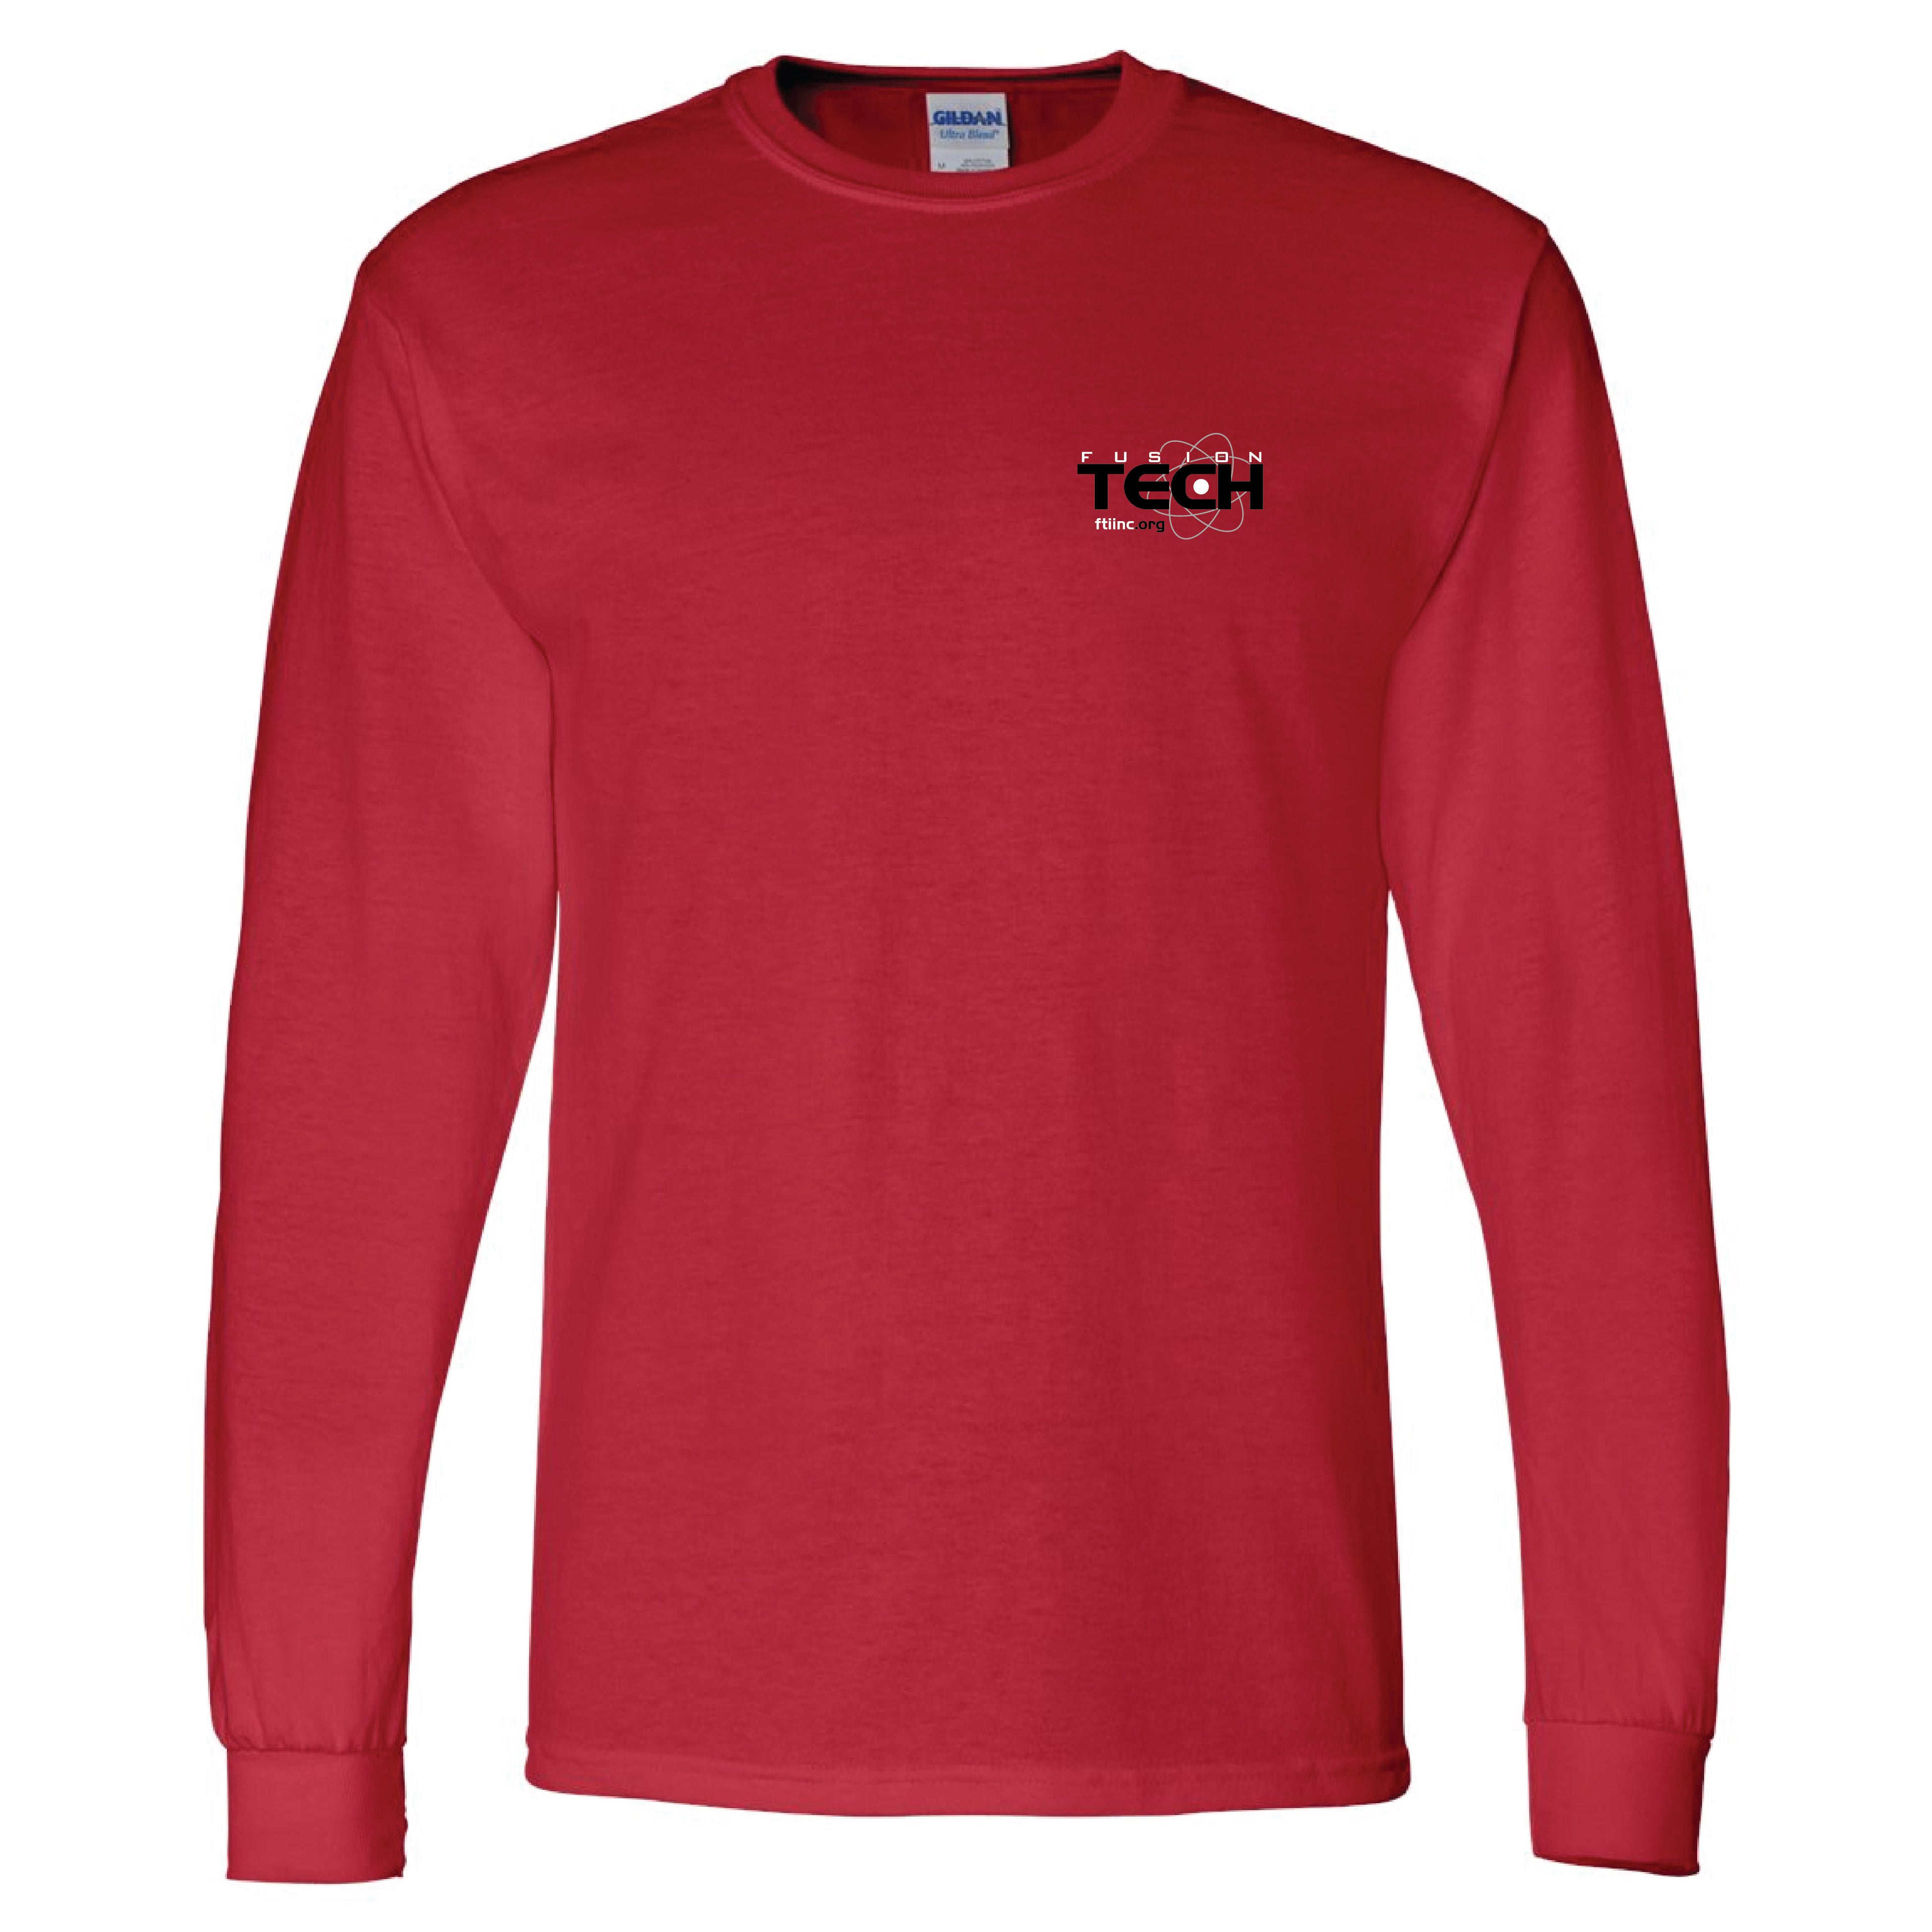 Fusion Tech Embroidered Longsleeve T-Shirt